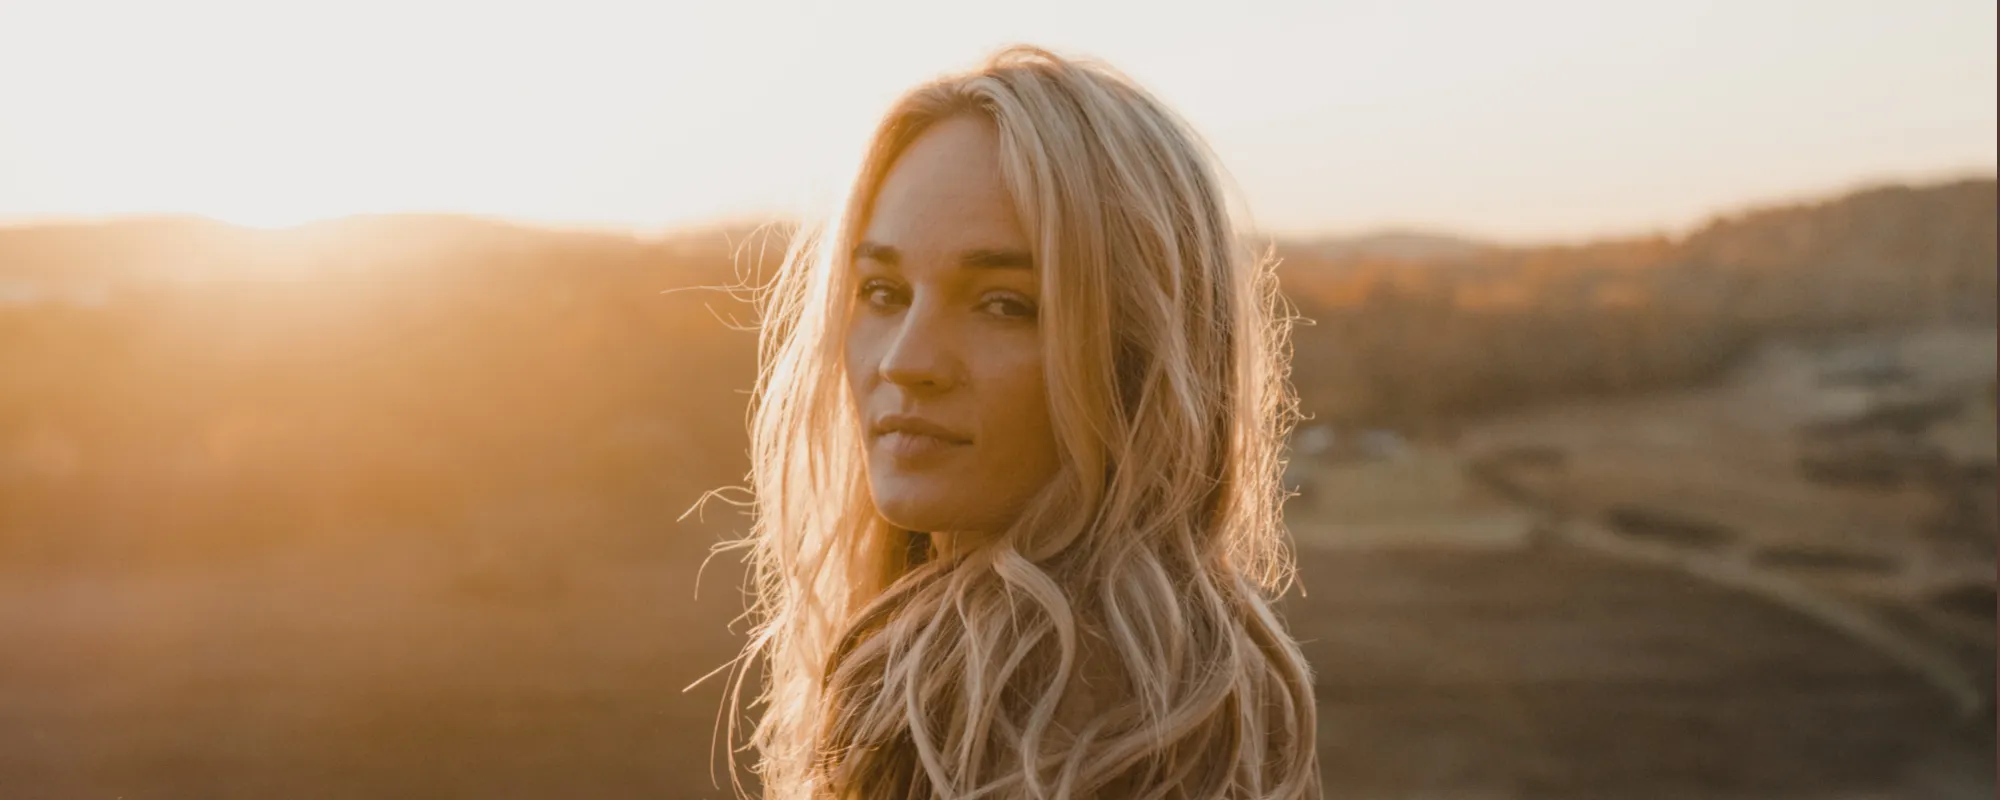 Jessica Willis Fisher Shares Her Story on Track By Track of New Album ‘Brand New Day’